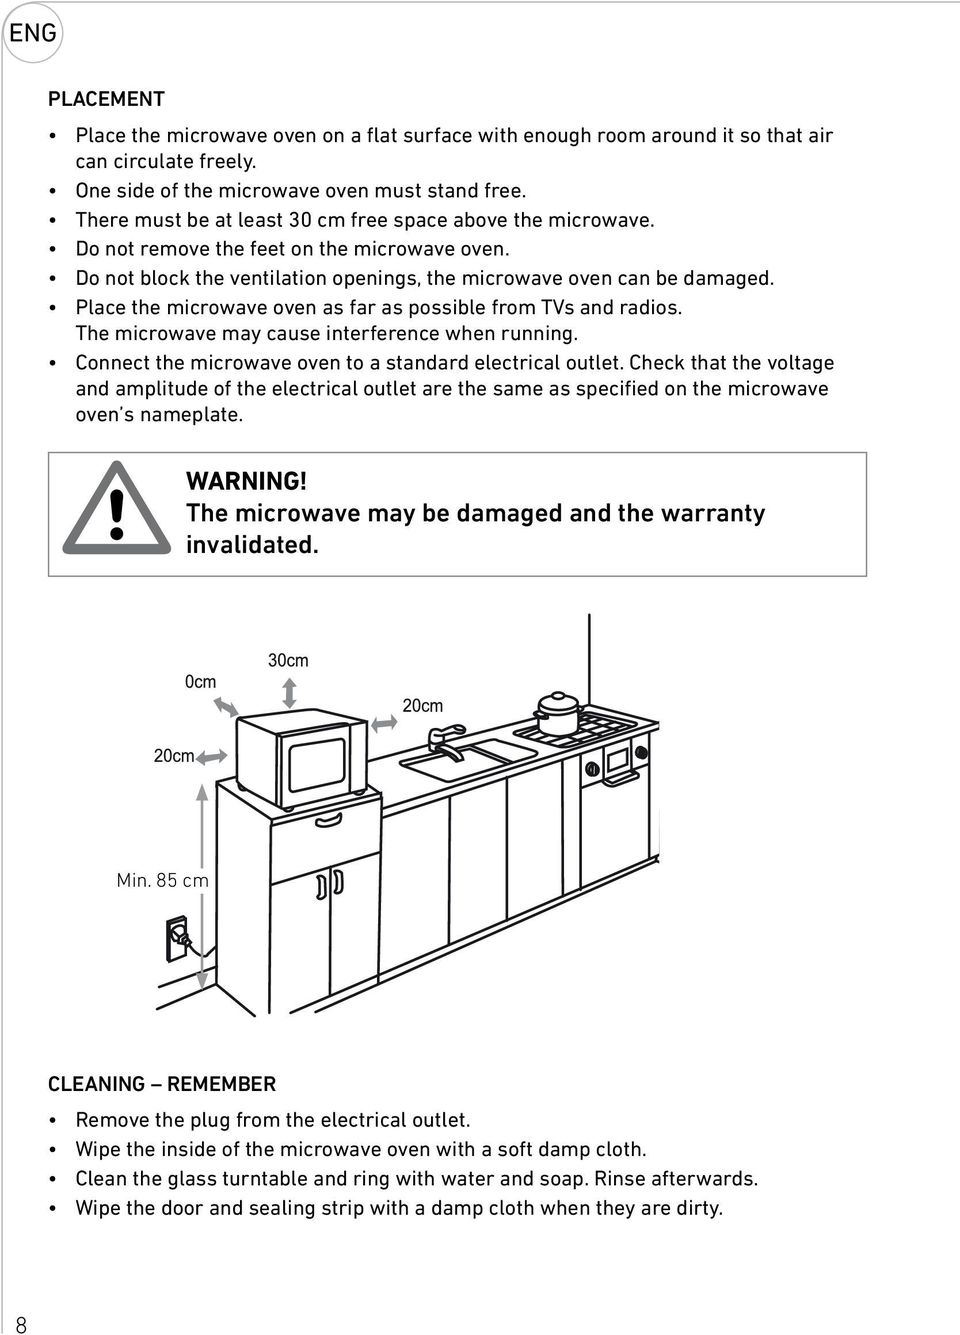 Place the microwave oven as far as possible from TVs and radios. The microwave may cause interference when running. Connect the microwave oven to a standard electrical outlet.